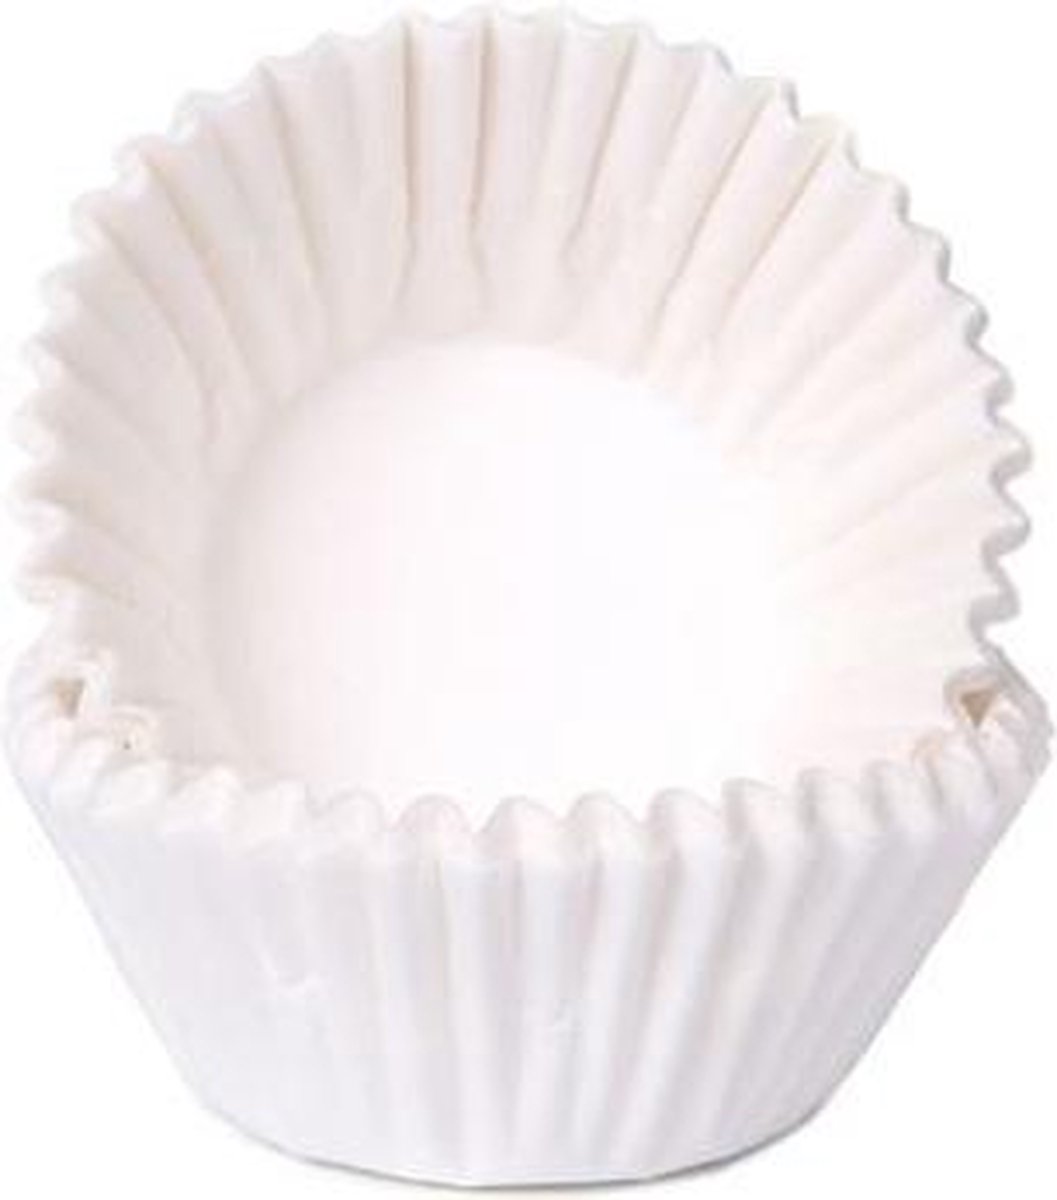 House of Marie Chocolade Baking Cups - Wit - pk/100